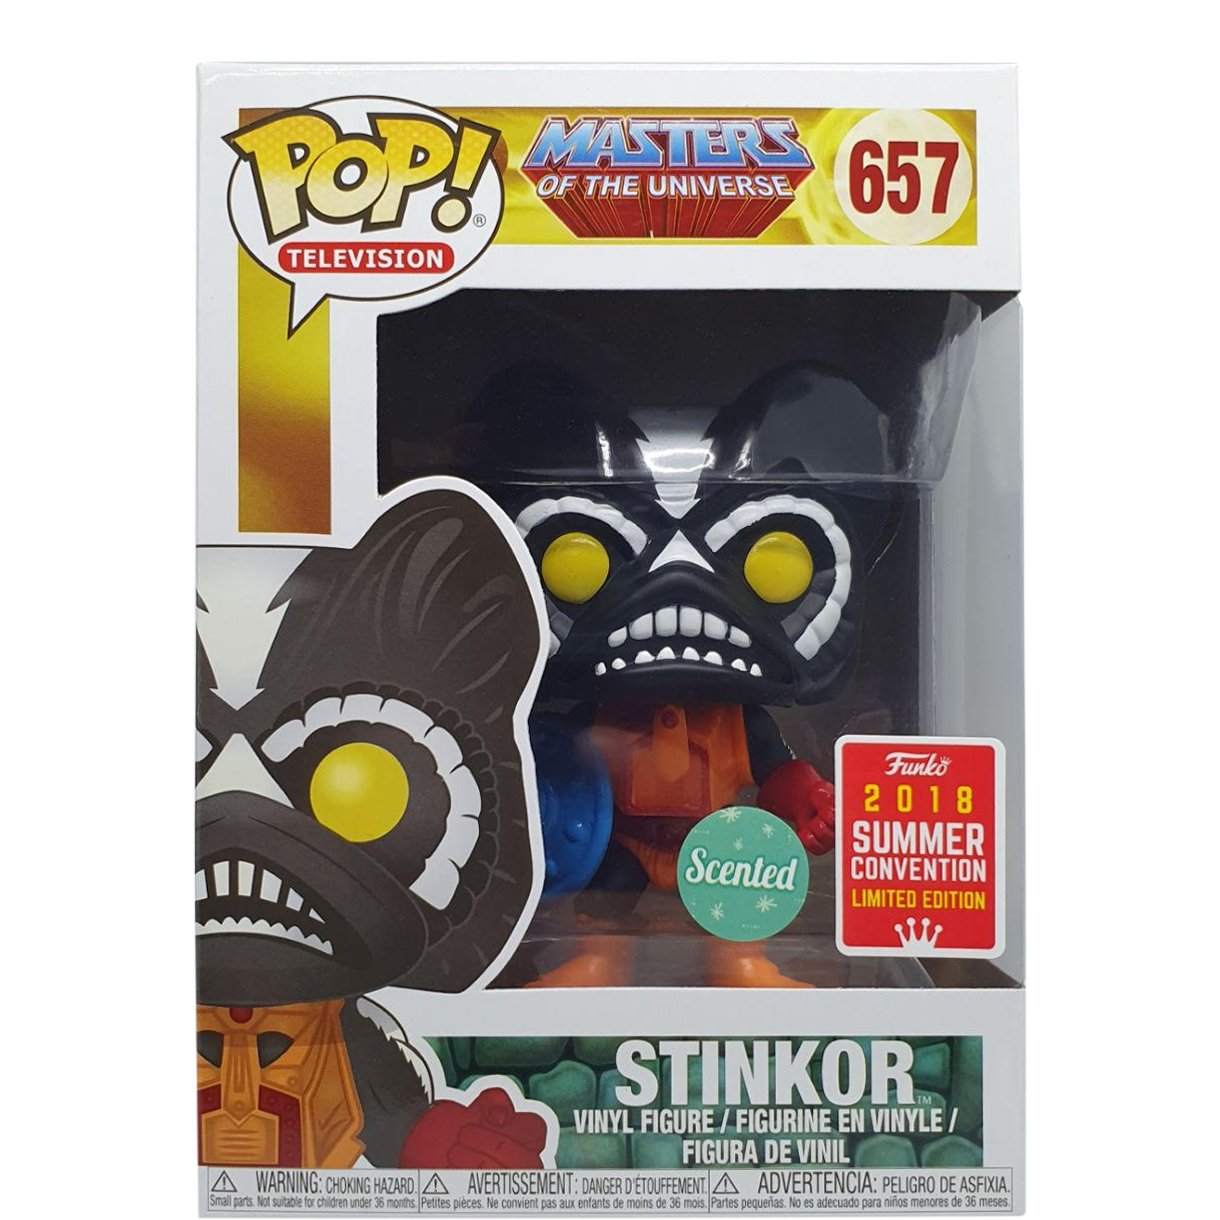 Funko Pop! Television Masters of the Universe Stinkor (Scented) Summer  Convention Exclusive Figure #657